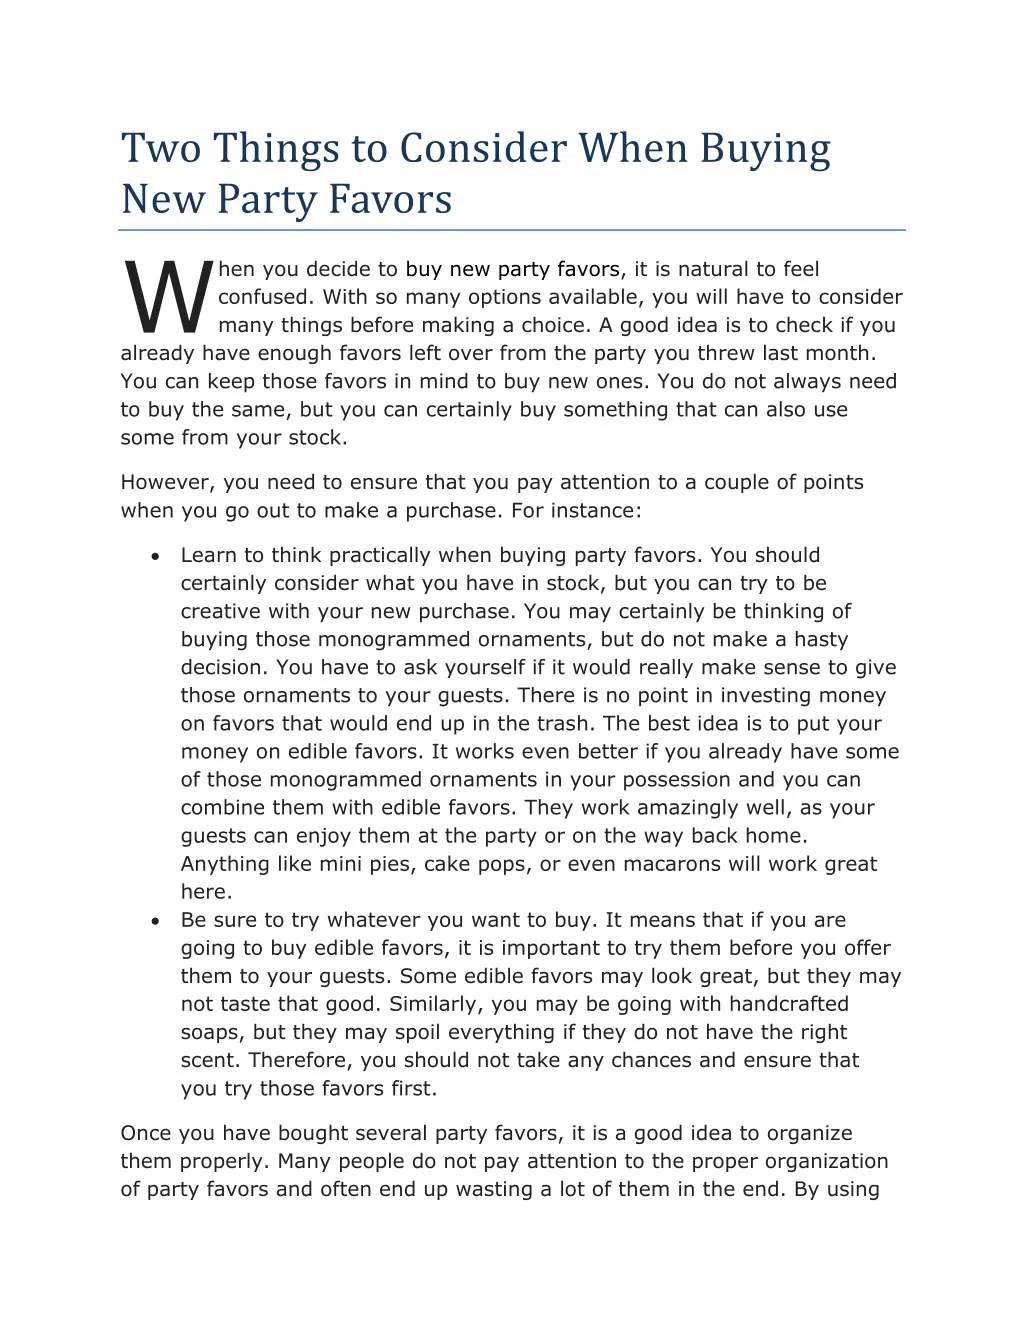 two things to consider when buying new party